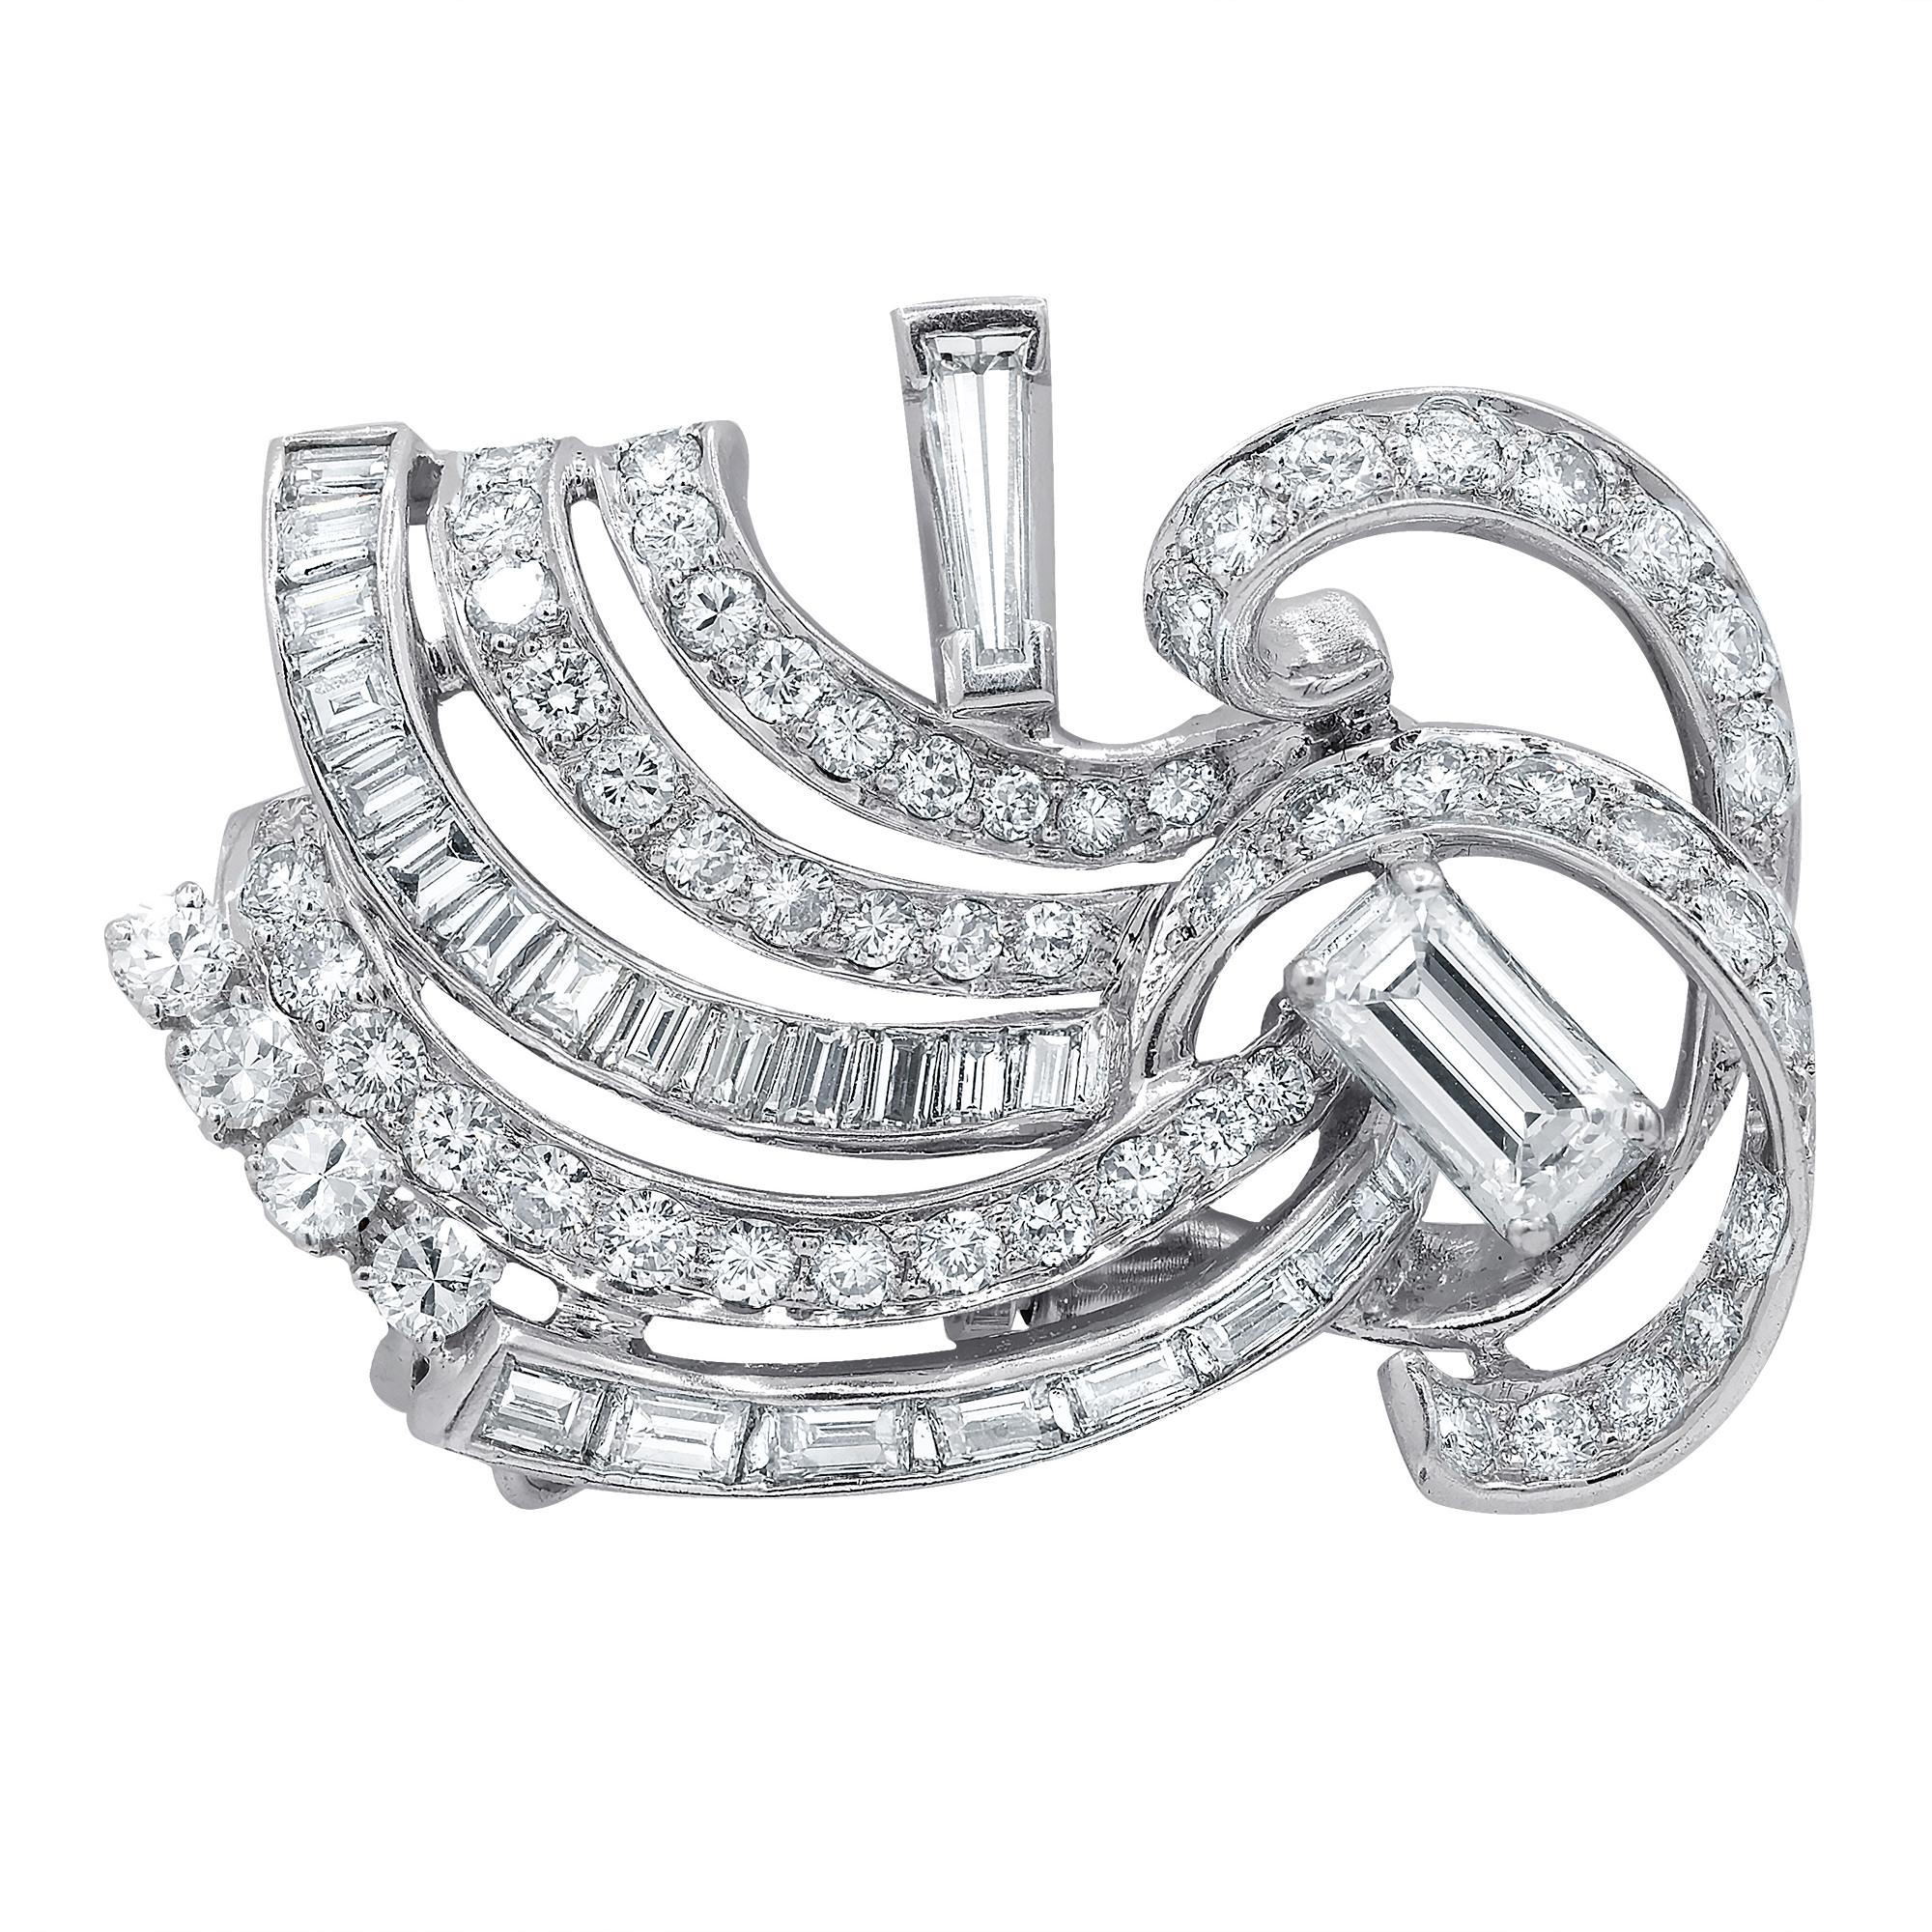 Platinum diamond brooch featuring 5.15ct of baguettes and round diamonds
